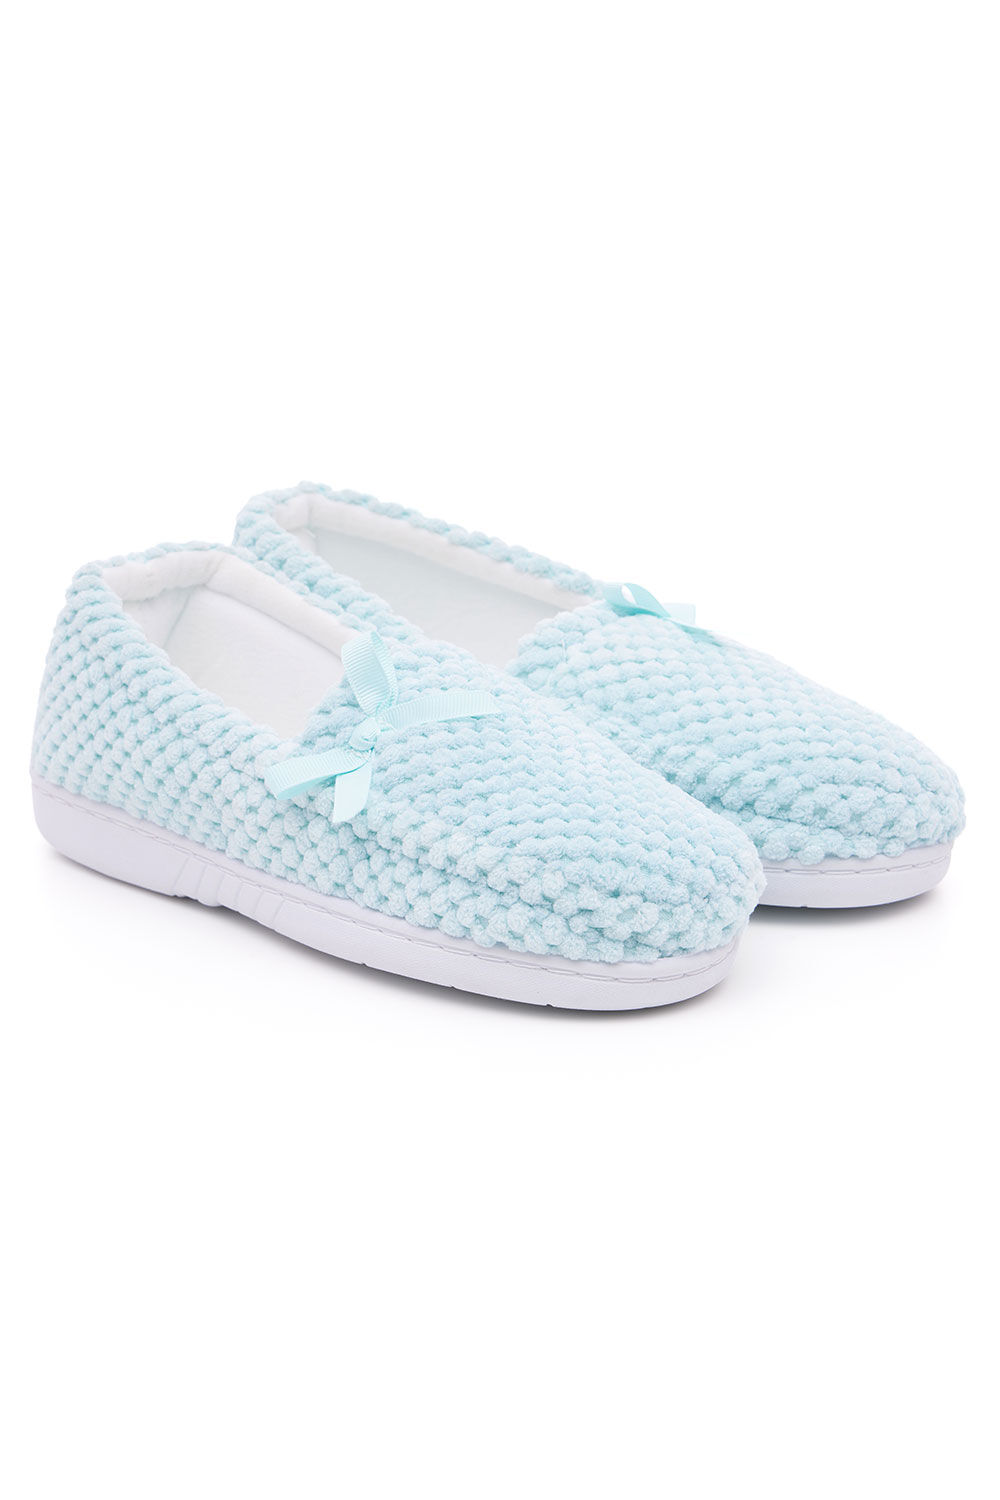 Bonmarche Blue Fleece Moccasin Slippers With Bow Detail, Size: 3